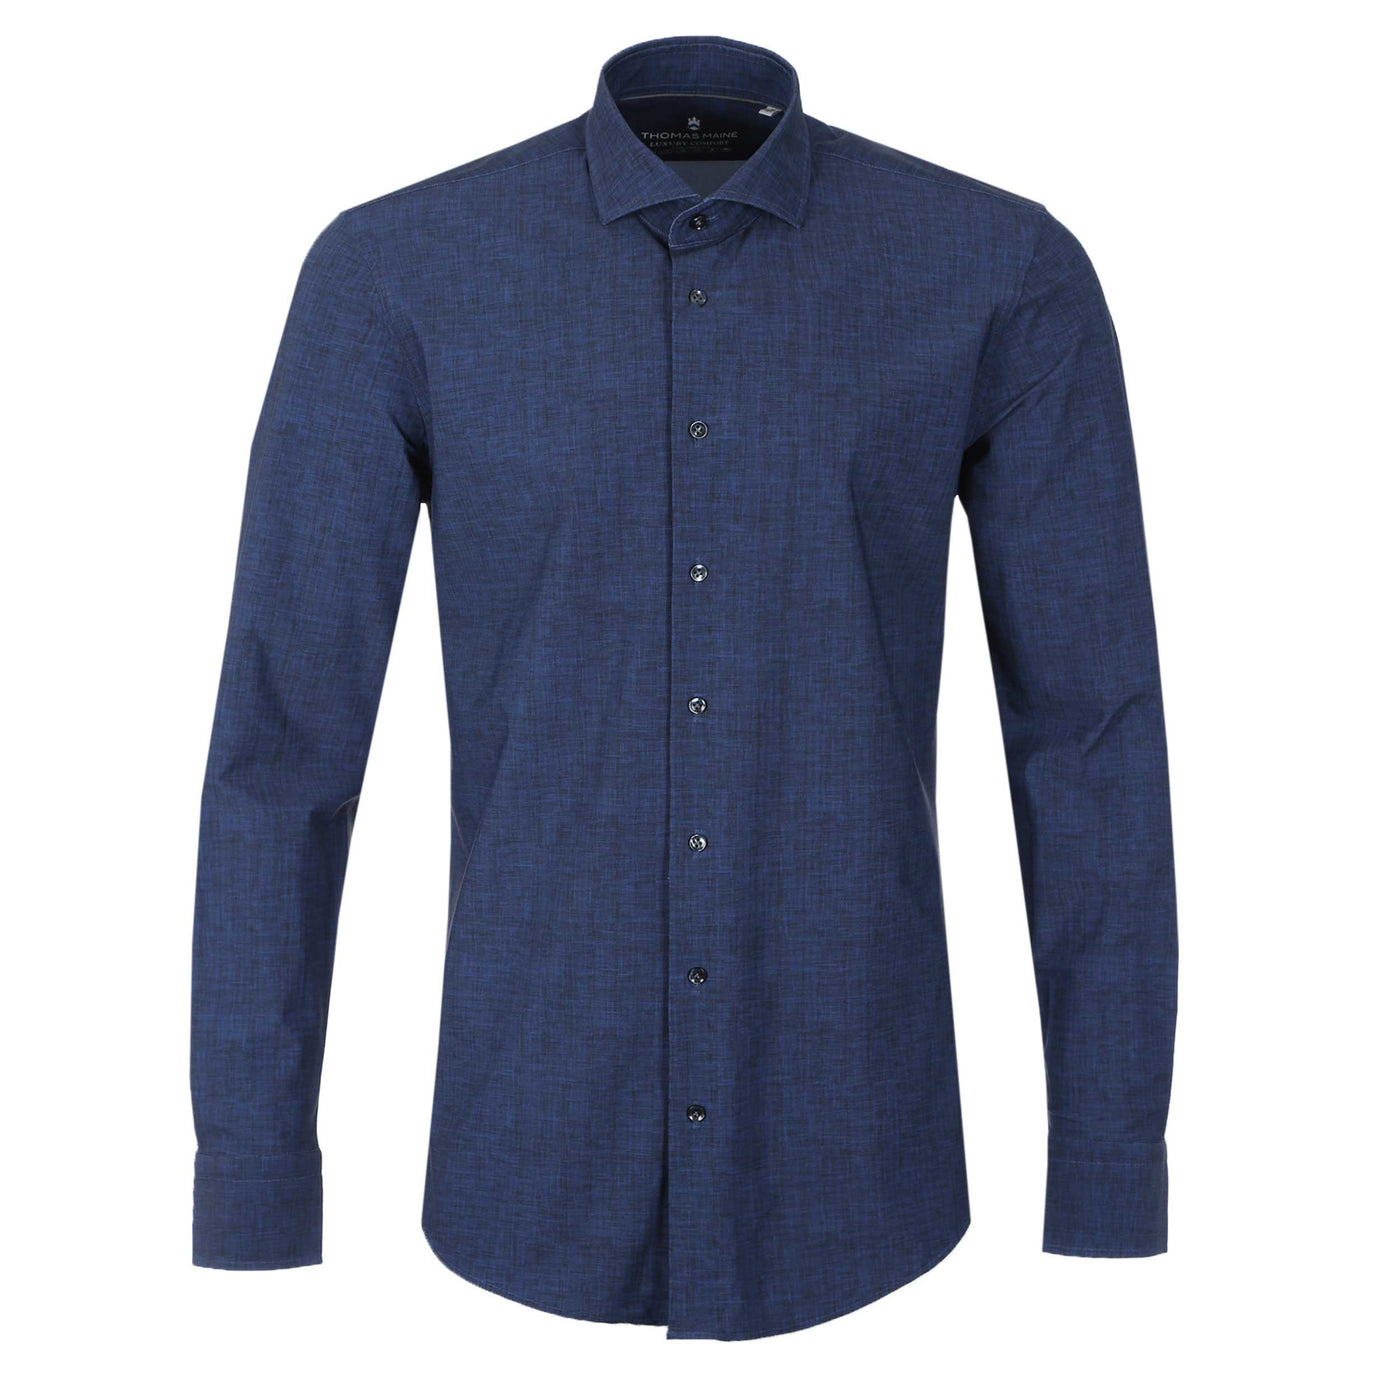 Thomas Maine Canclini Stretch Shirt in Navy